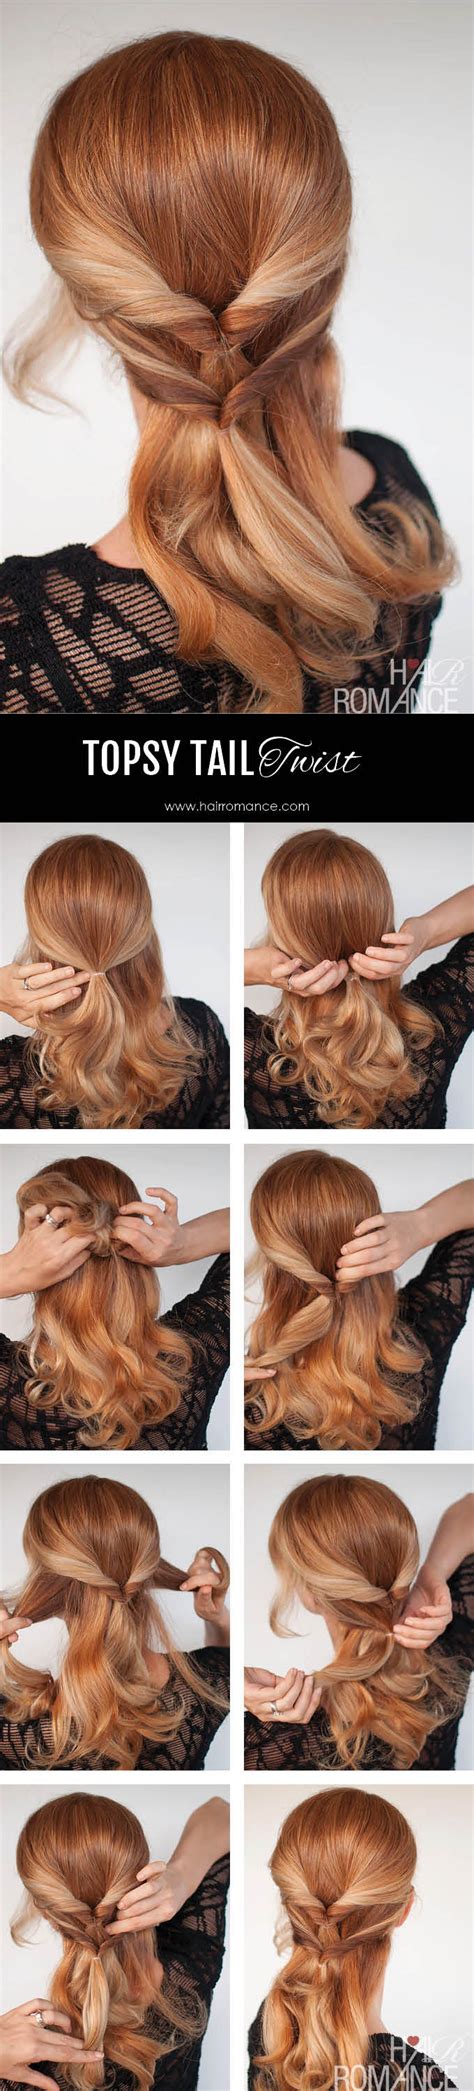 new hairstyle tutorial a twist on the topsy tail hair